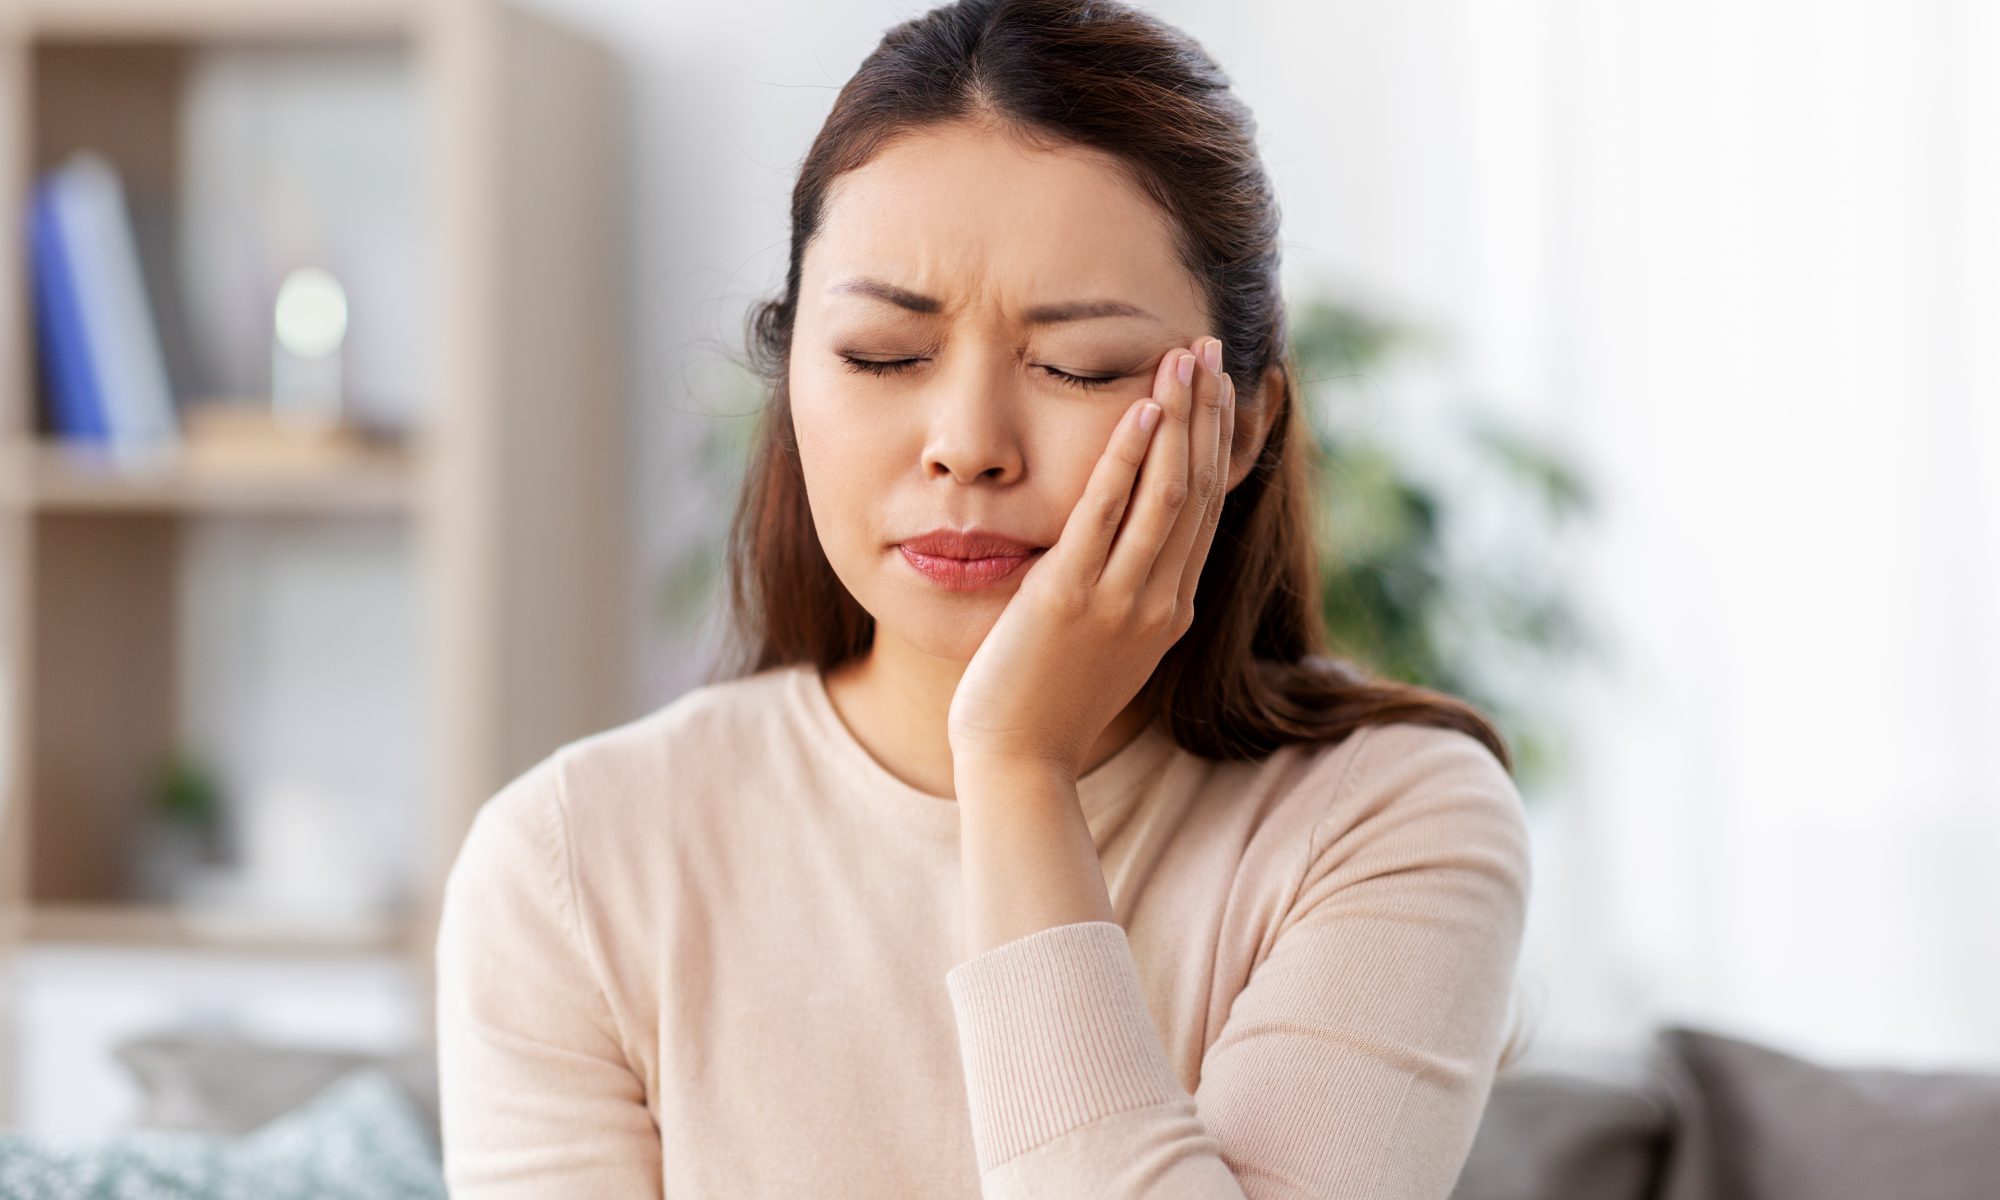 unhappy woman suffering from toothache at home